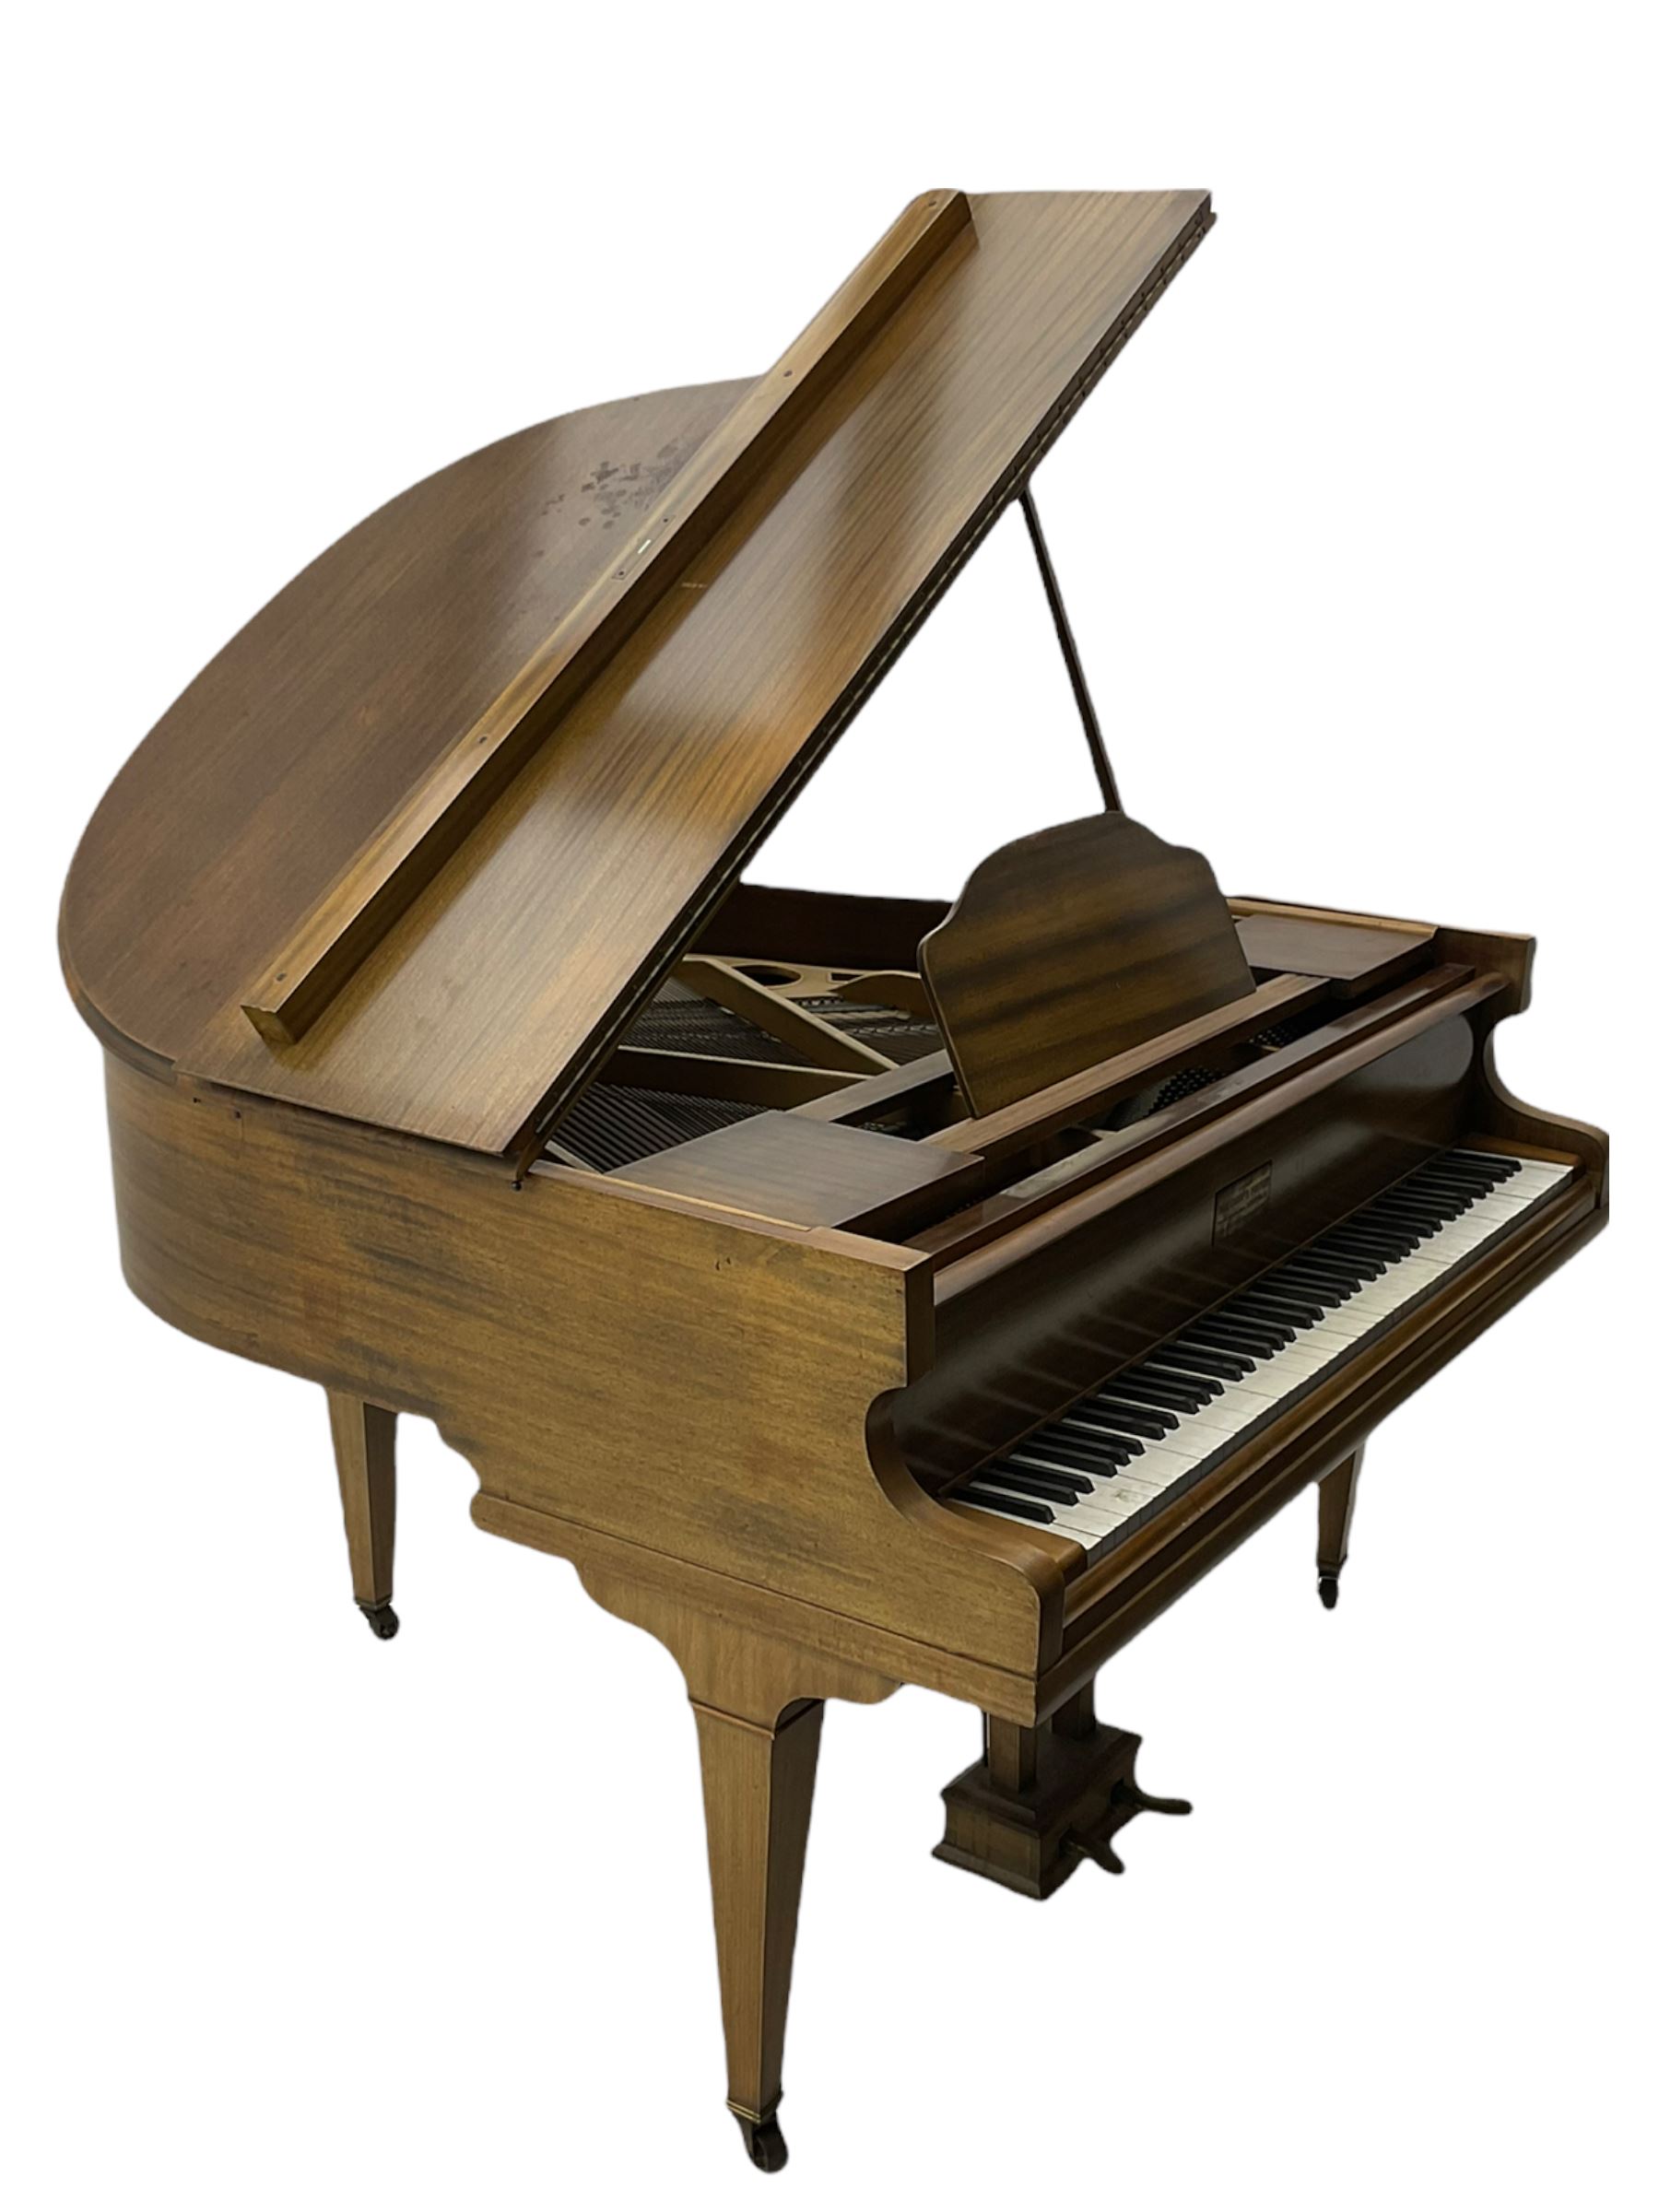 Brindley & Foster mahogany cased baby grand piano - Image 10 of 10